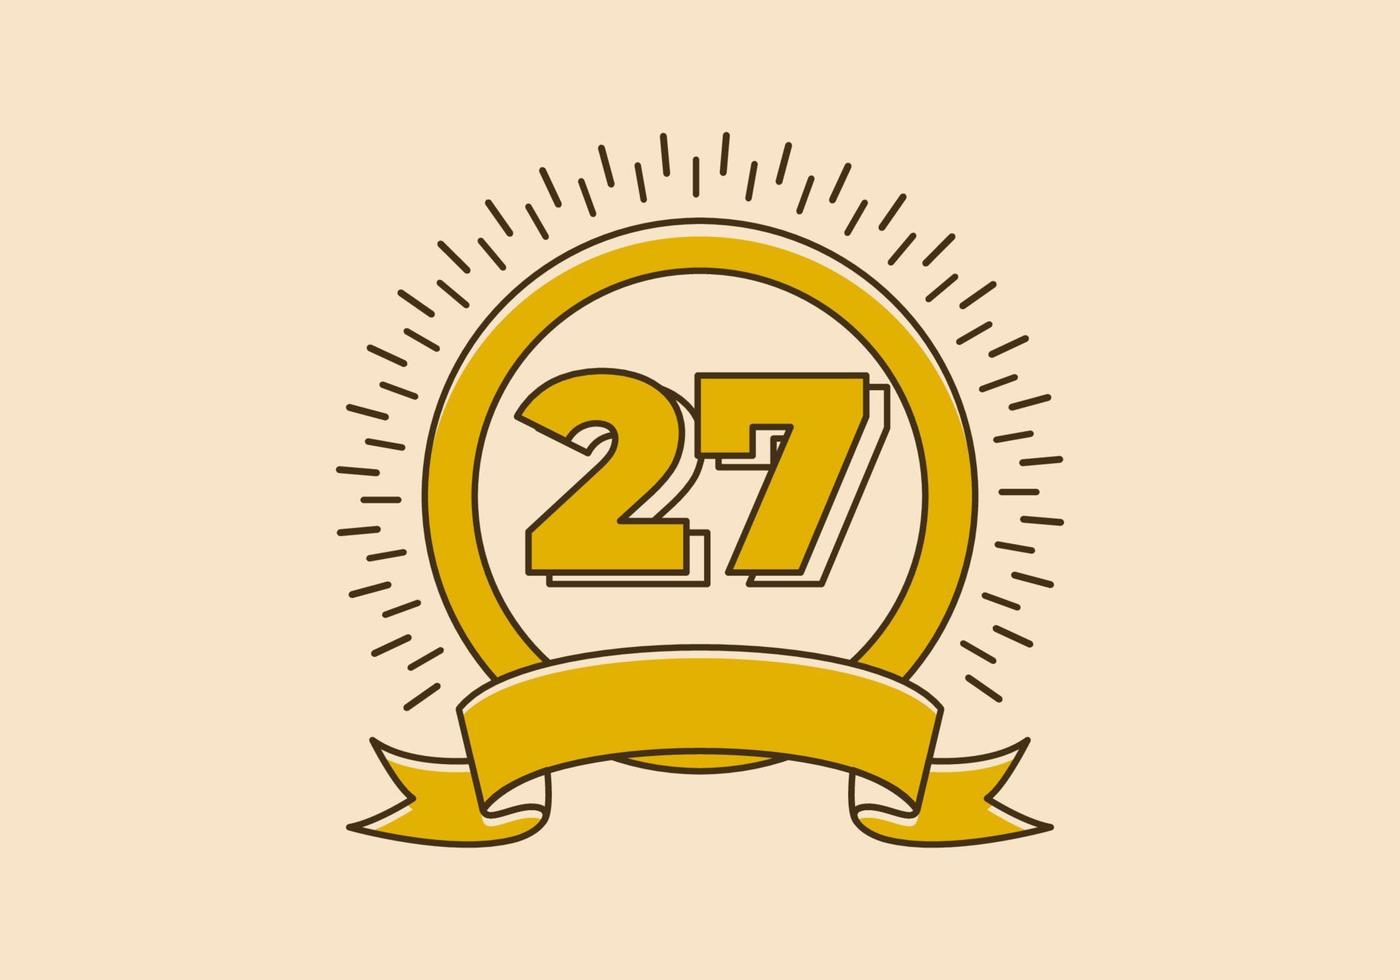 Vintage yellow circle badge with number 27 on it vector